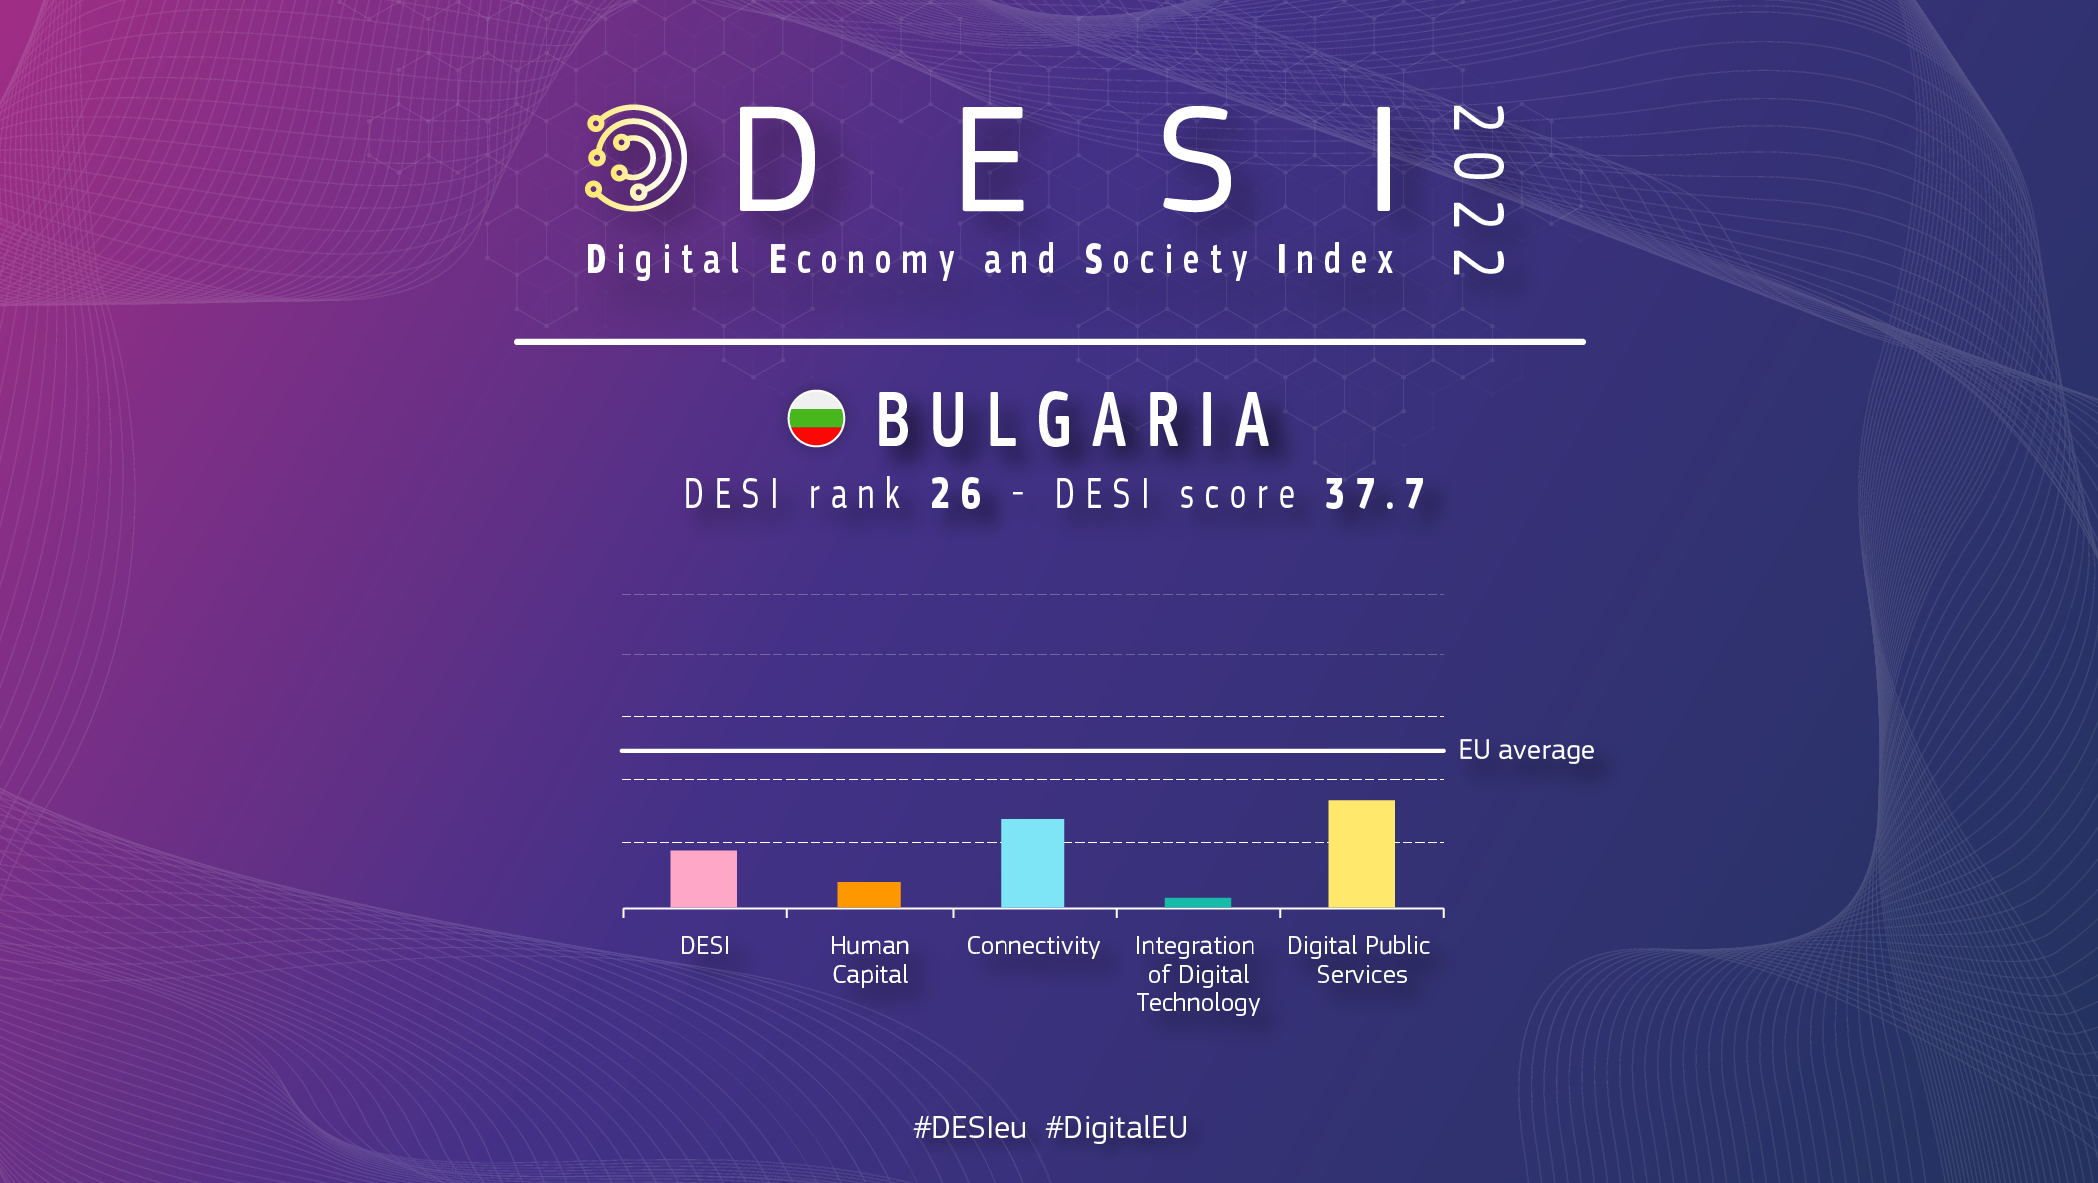 Graphic overview of Bulgaria in DESI showing a ranking of 26 and a score of 37.7